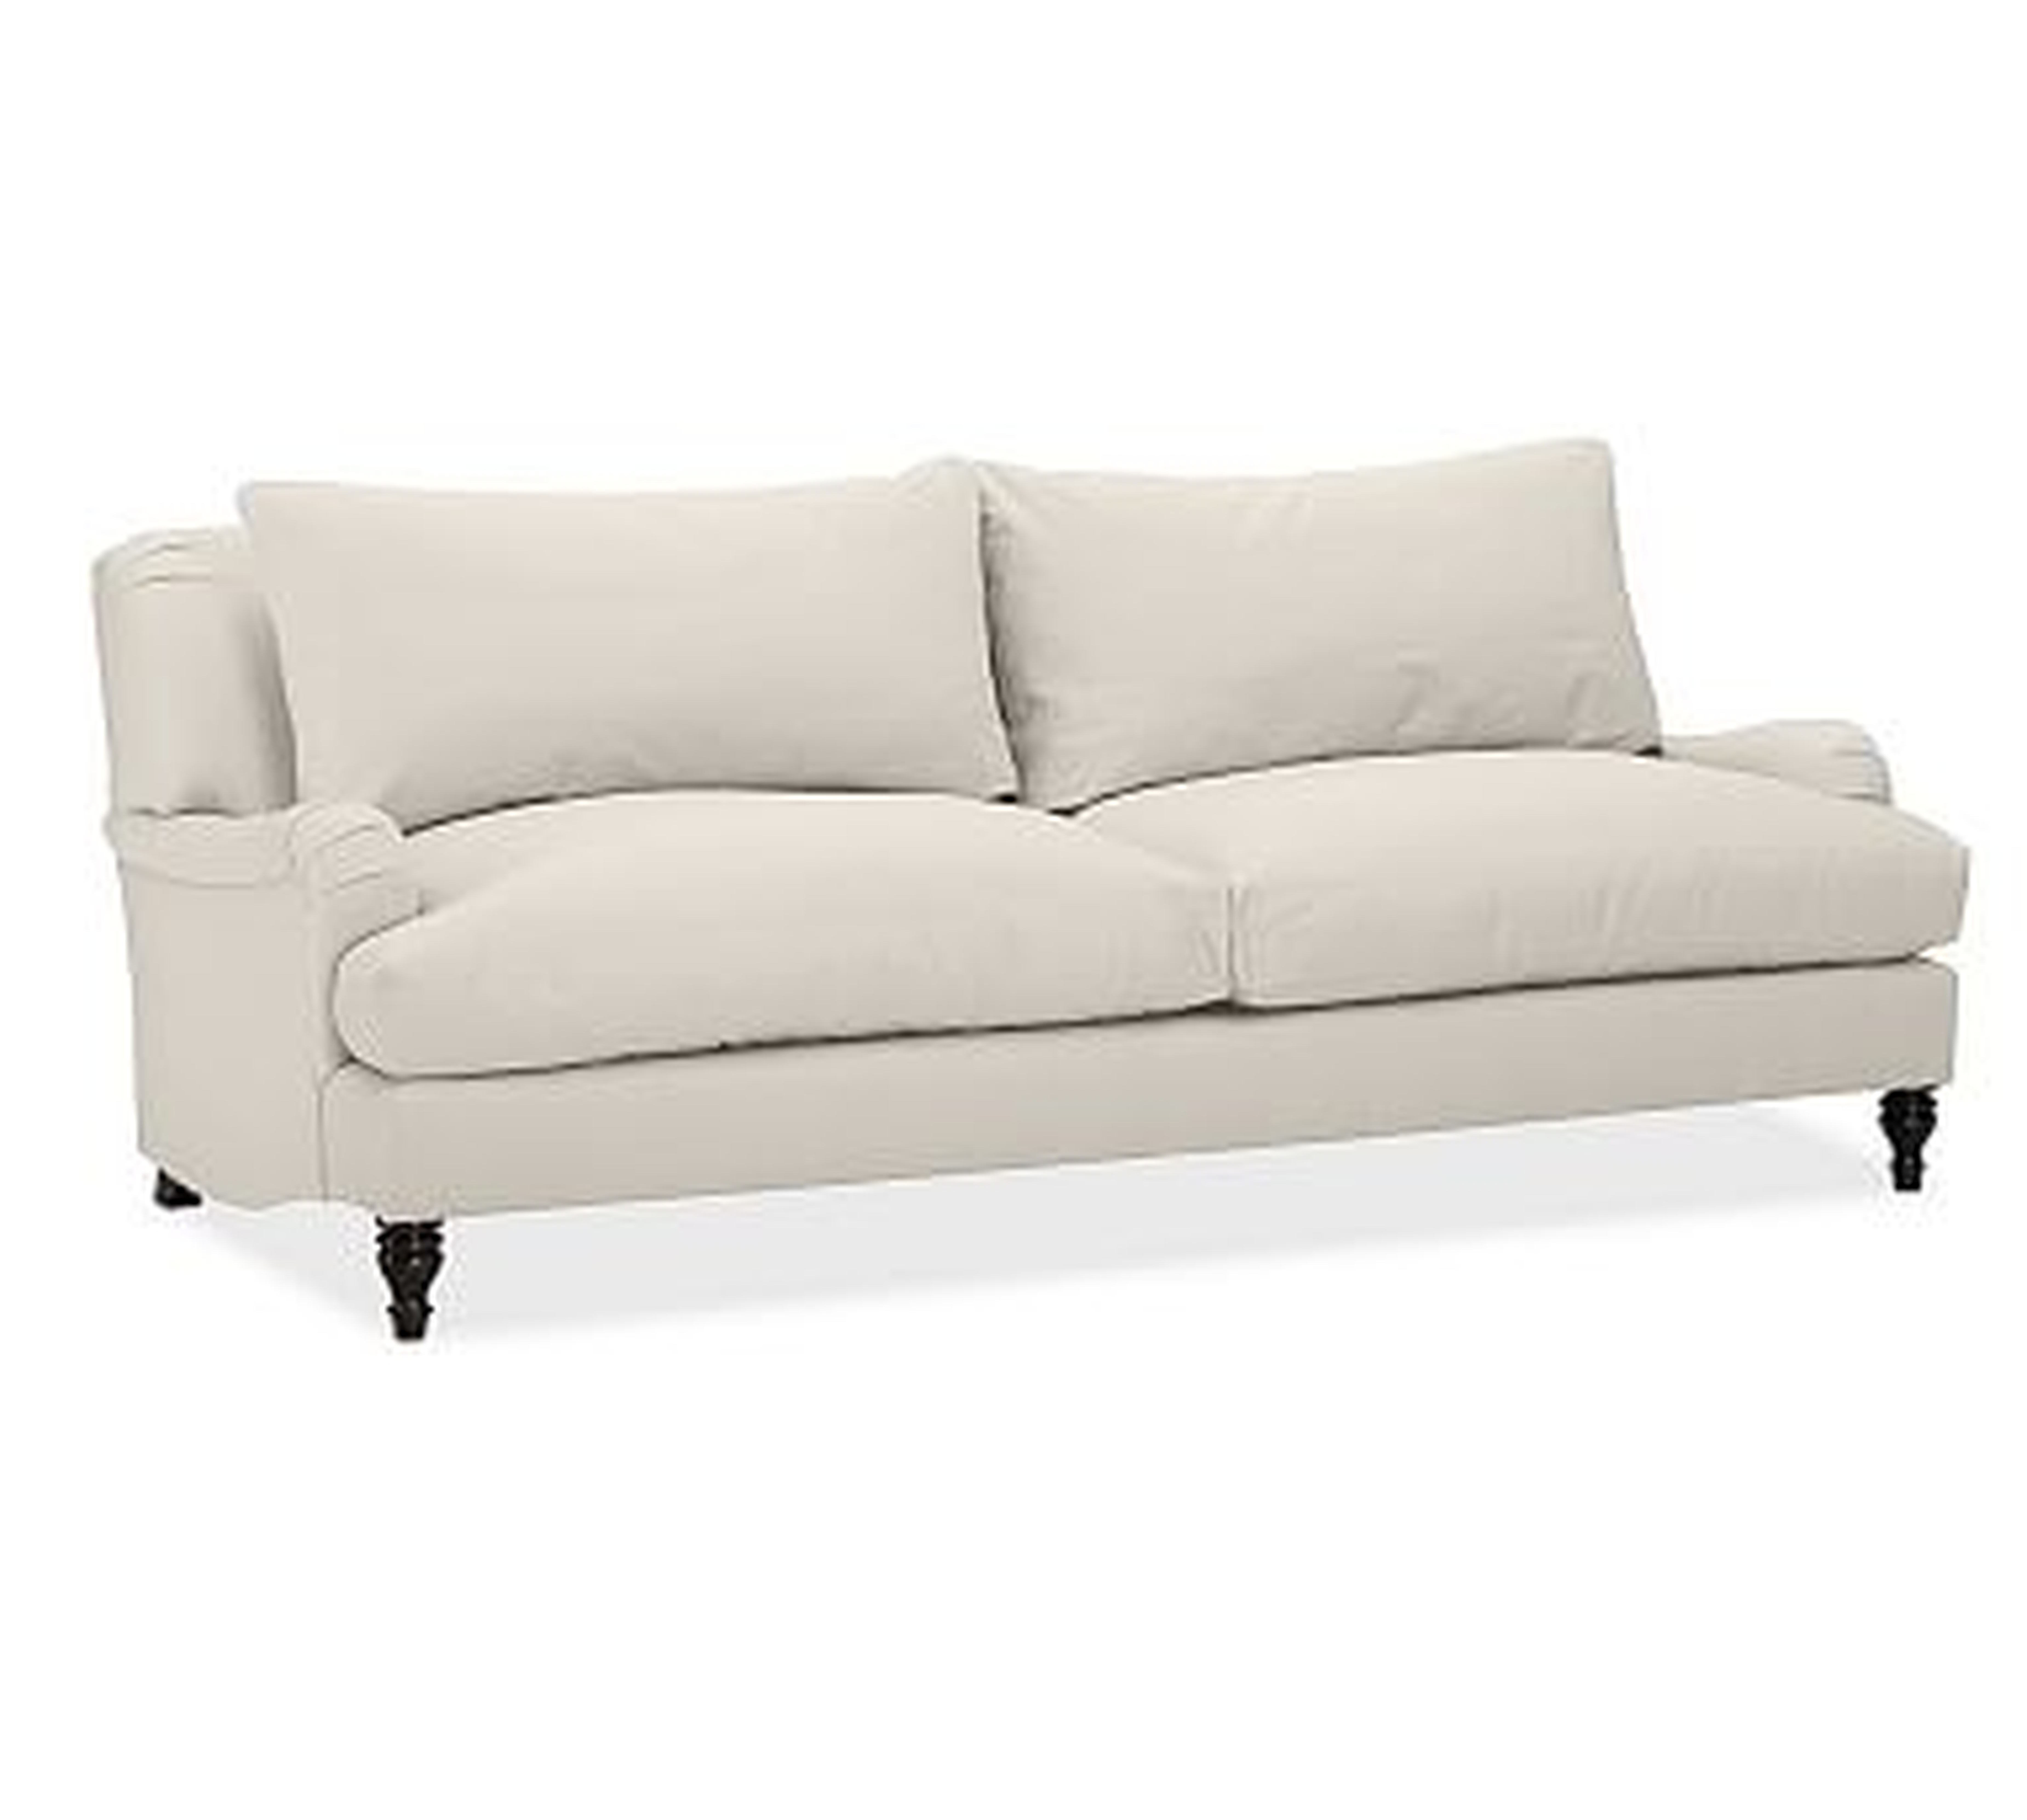 Carlisle Upholstered Sofa 82", Polyester Wrapped Cushions, Performance Twill Cream - Pottery Barn